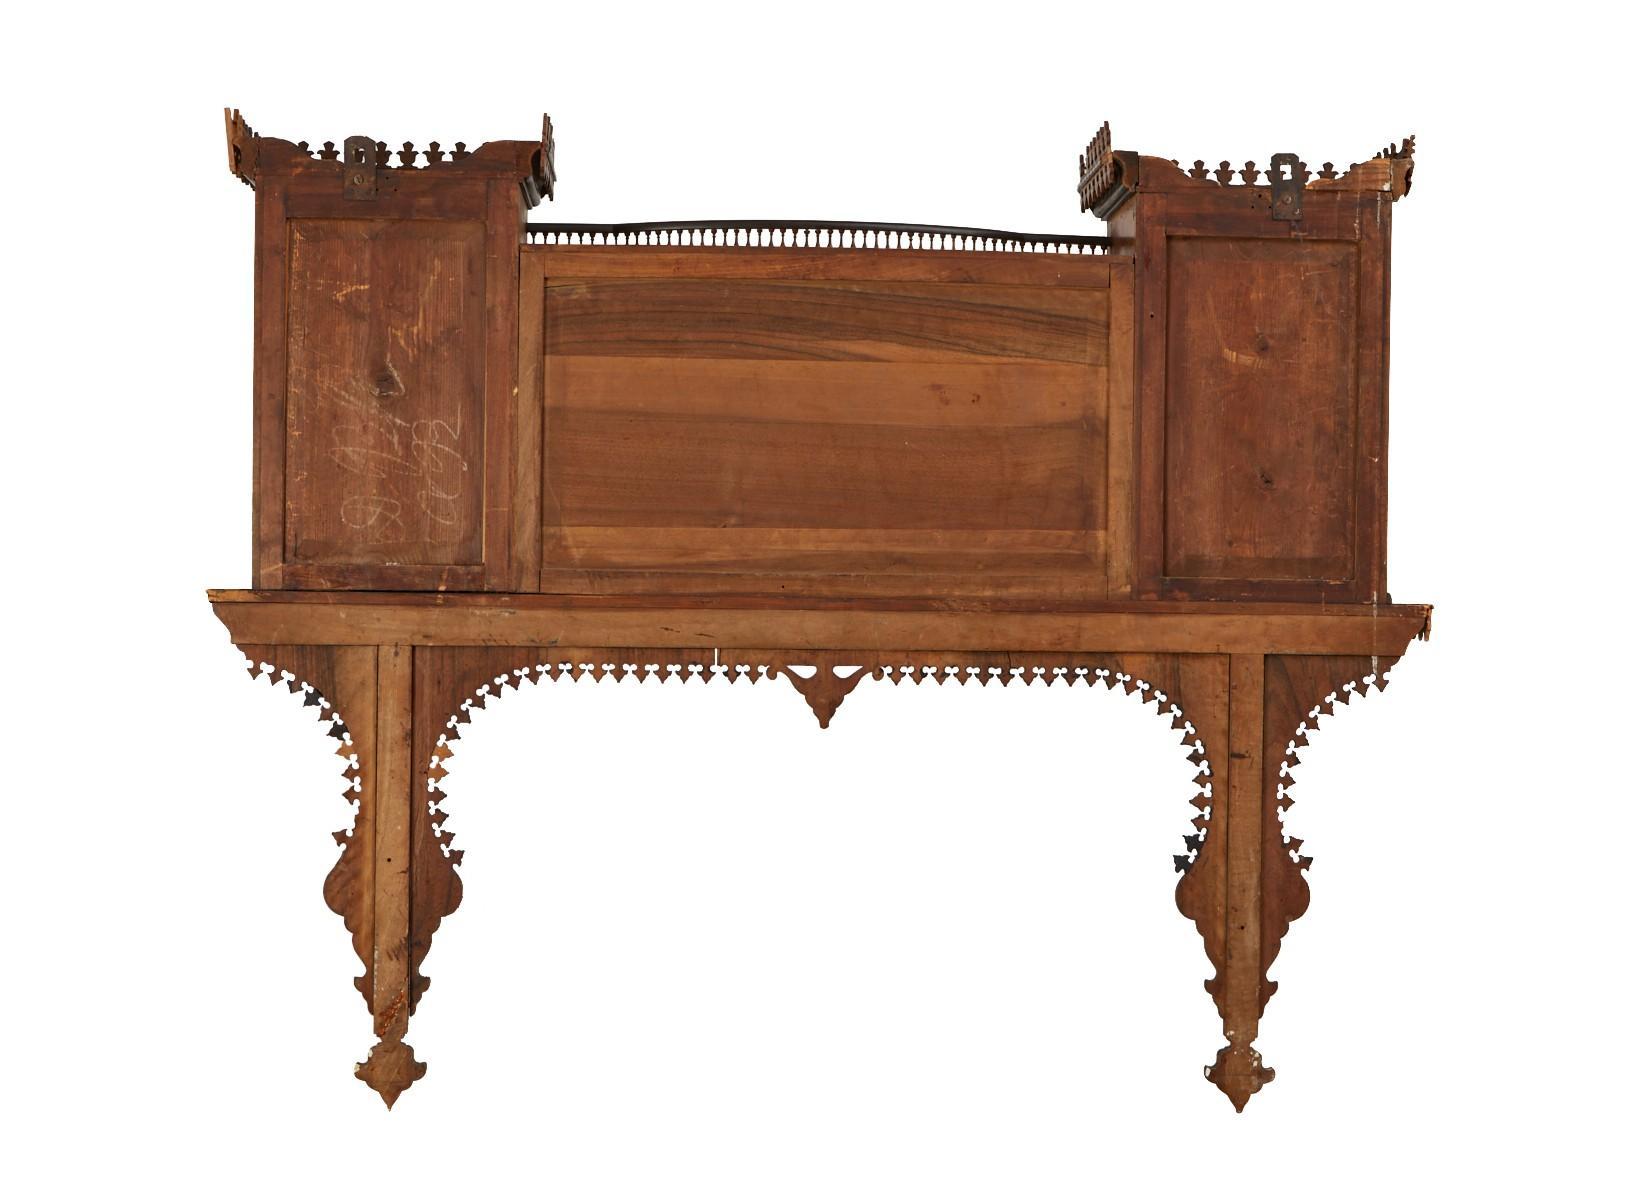 19th Century wall cabinet with architectural inspired form having intricate marquetry inlay in walnut with contrasting wood mother of pearl and ebonized wood. The upper tier fine pierced fret gallery and bracket supports on either side. The parapet